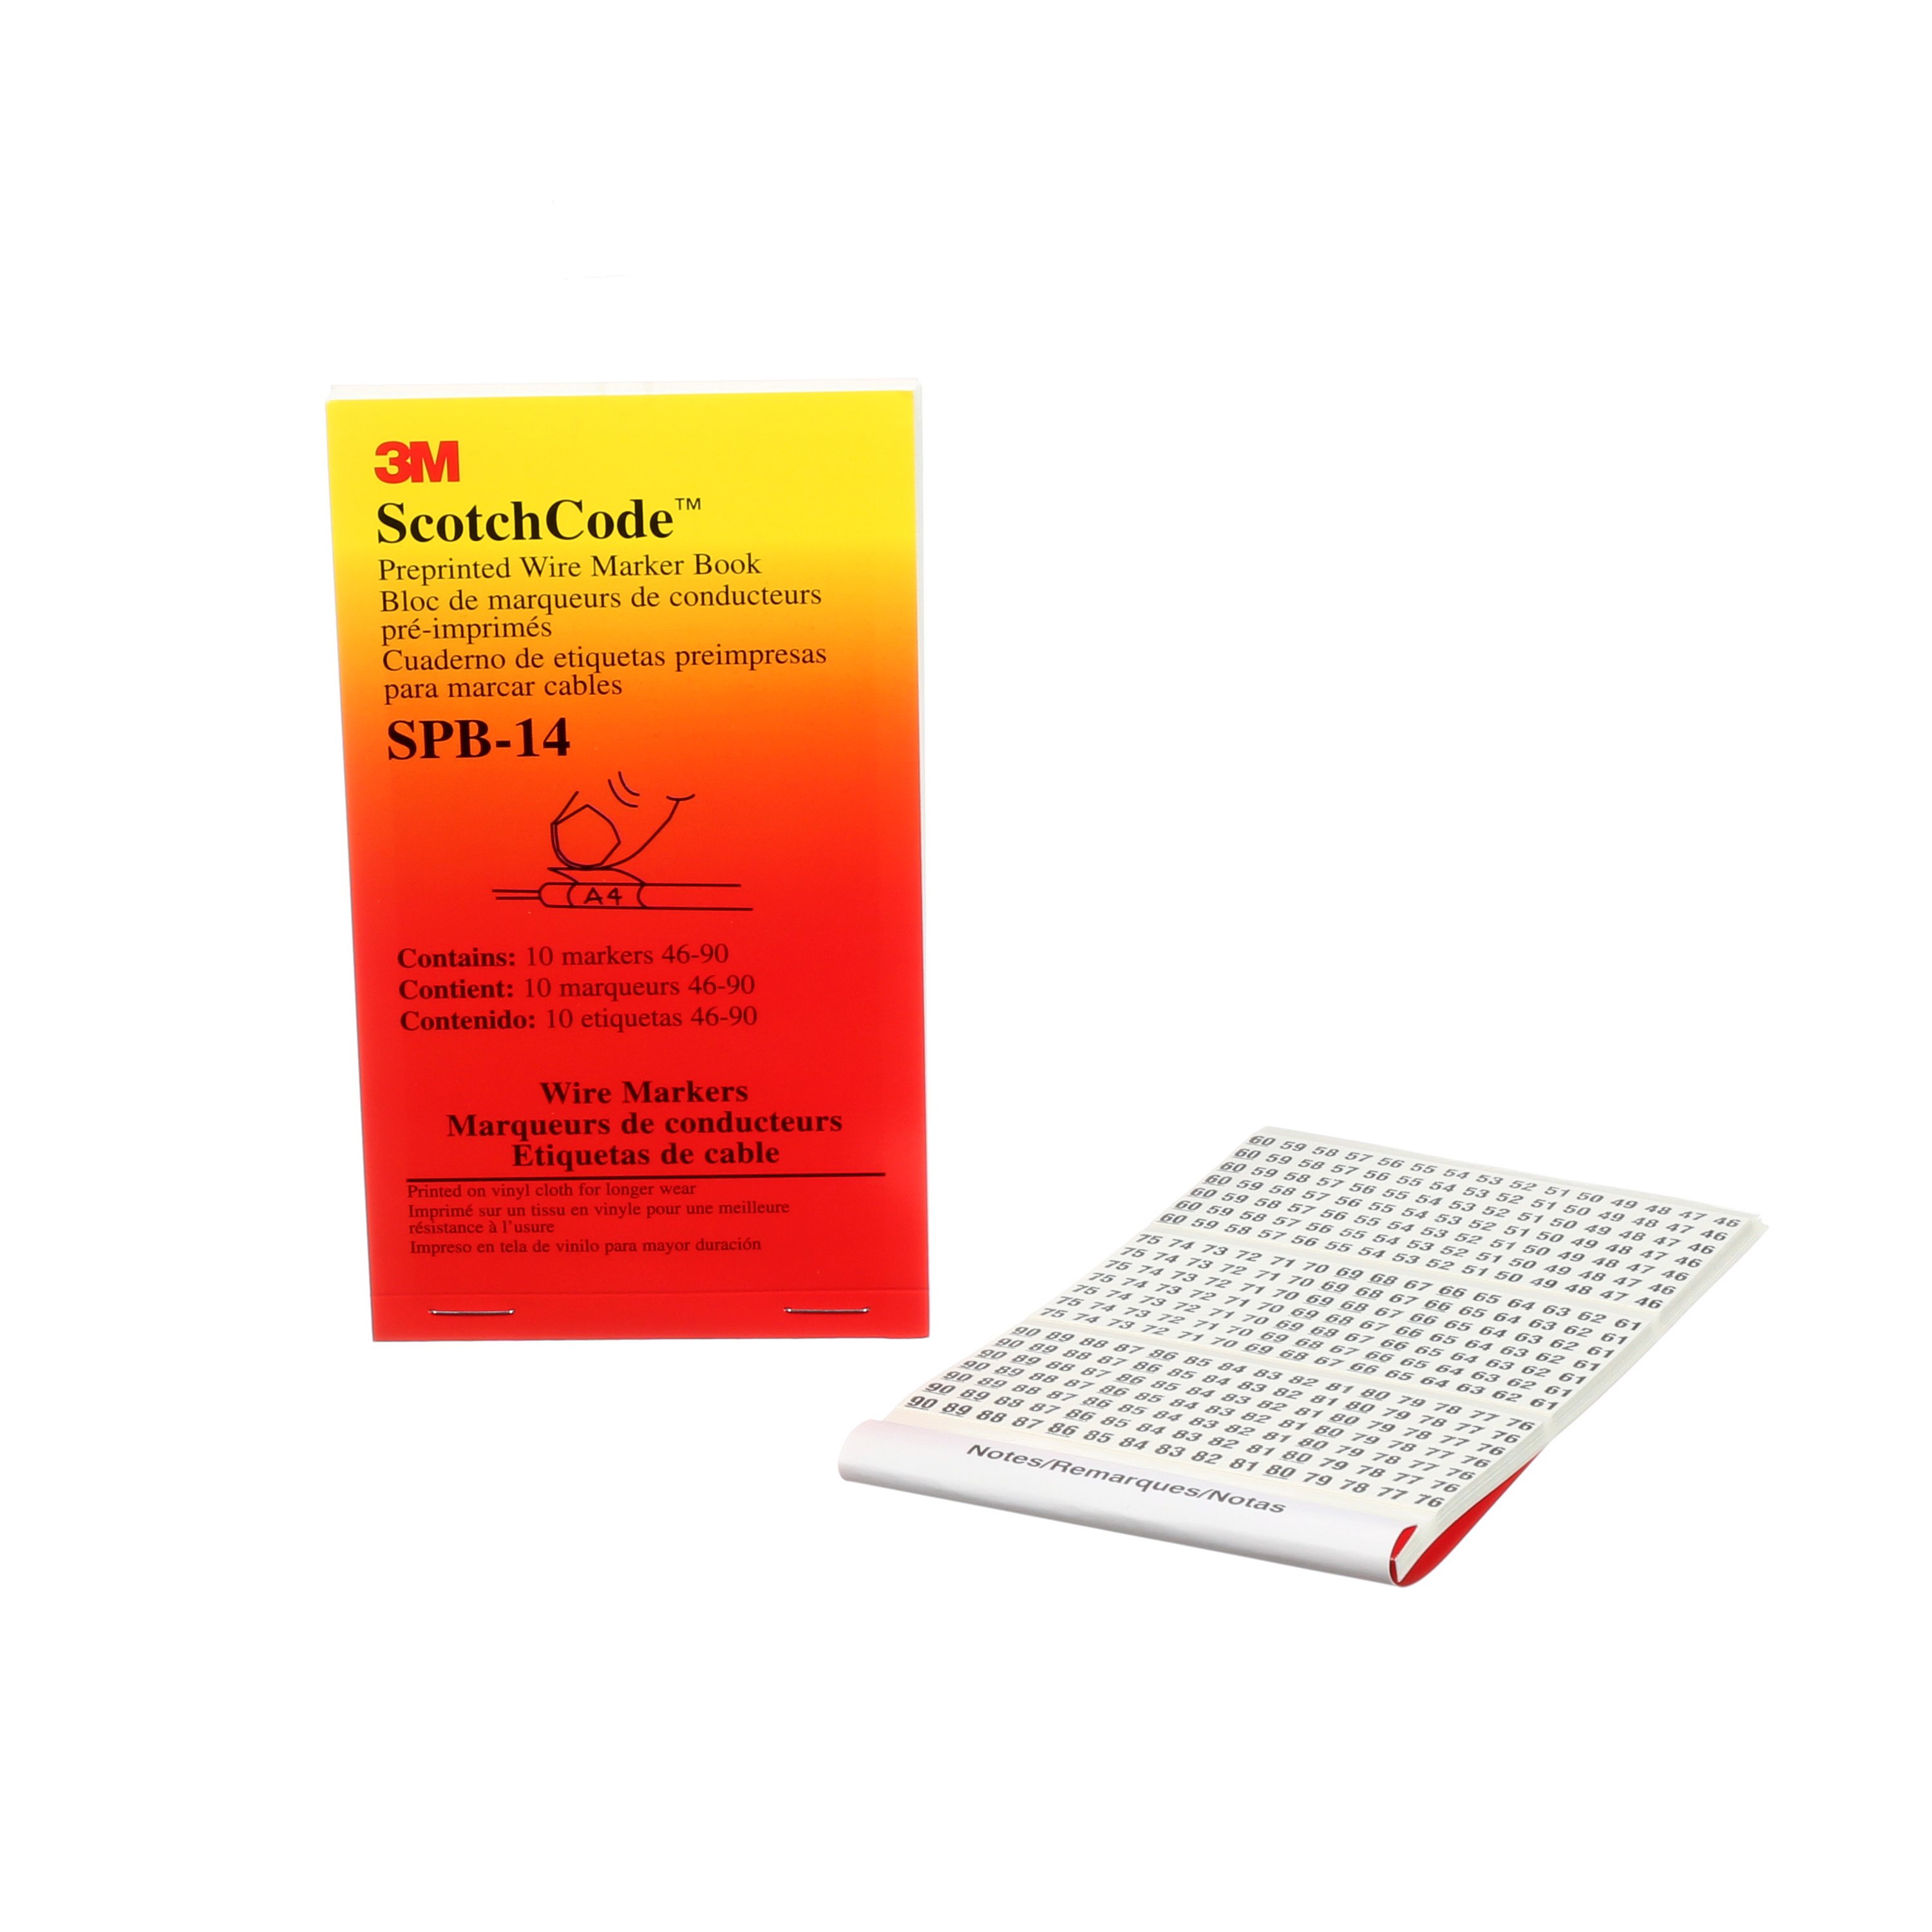 3M™ ScotchCode™ Pre-Printed Wire Marker Books SPB contain printed vinyl coated cloth wire and terminal markers withclearly printed letters, numbers and industry-standard legends.